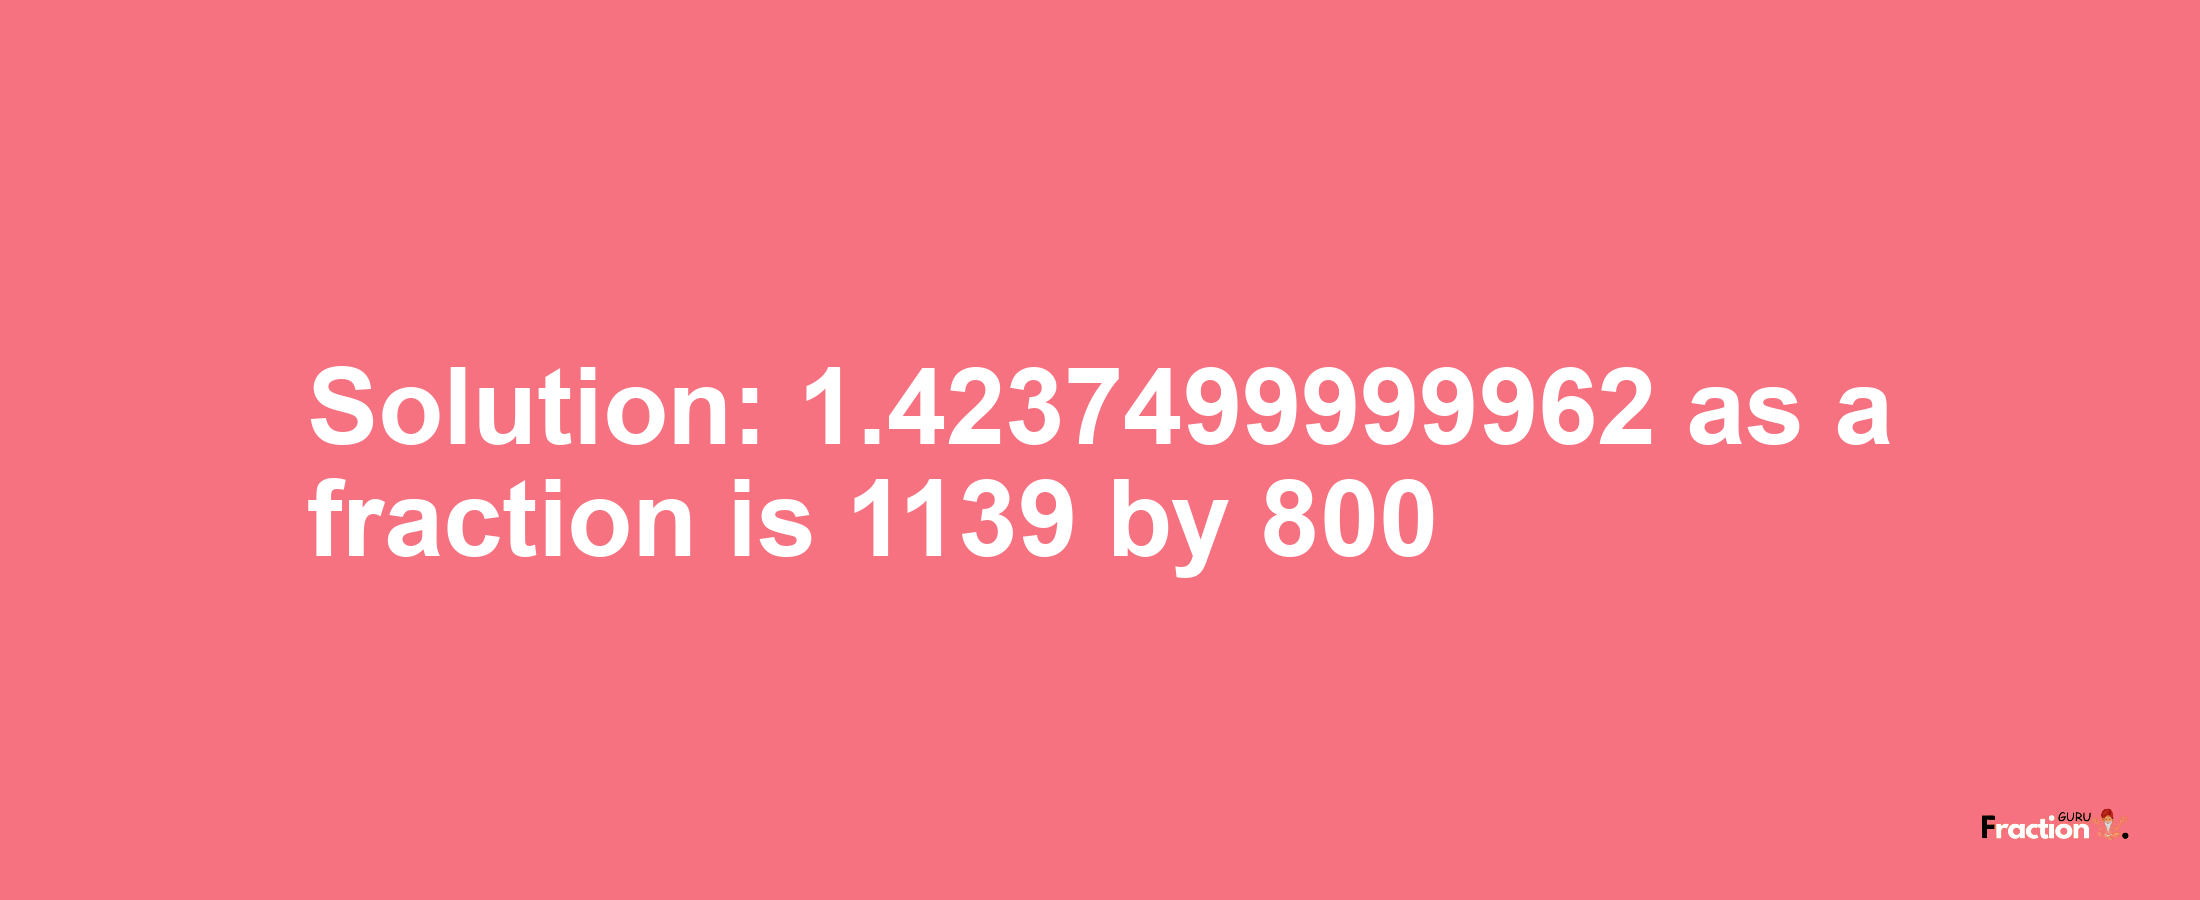 Solution:1.4237499999962 as a fraction is 1139/800